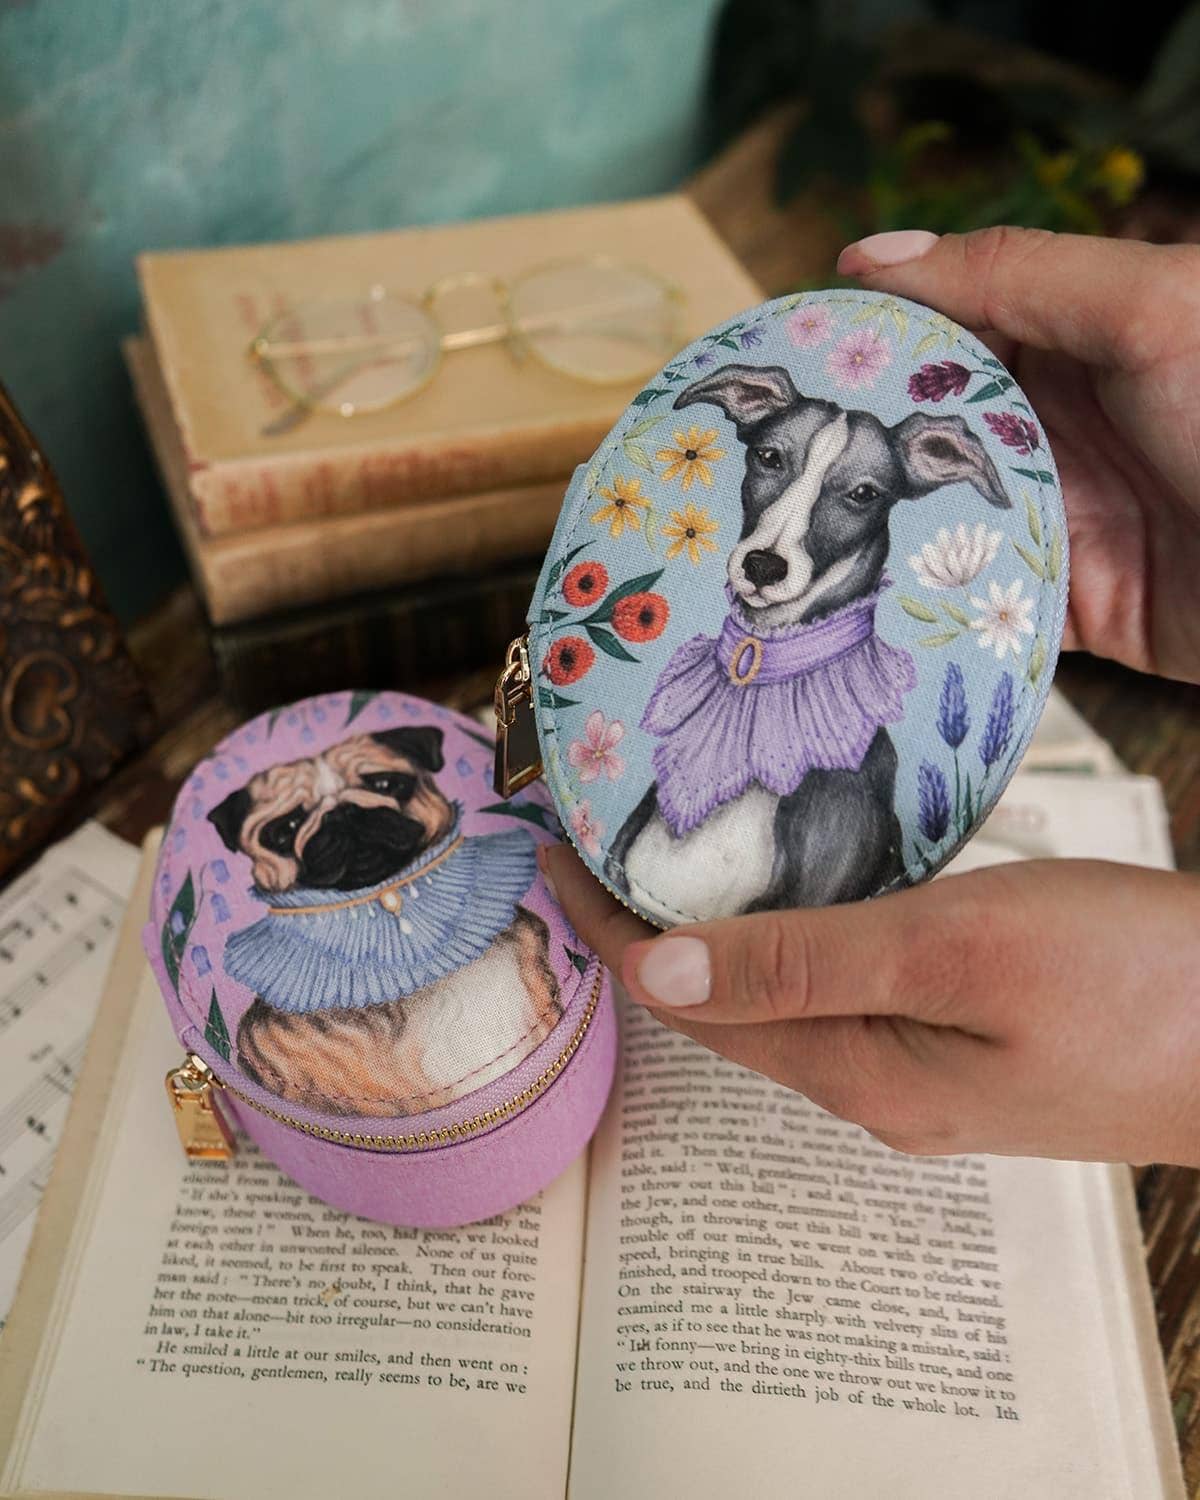 FABLE Catherine Rowe Pet Portraits Whippet Oval Jewelry Box